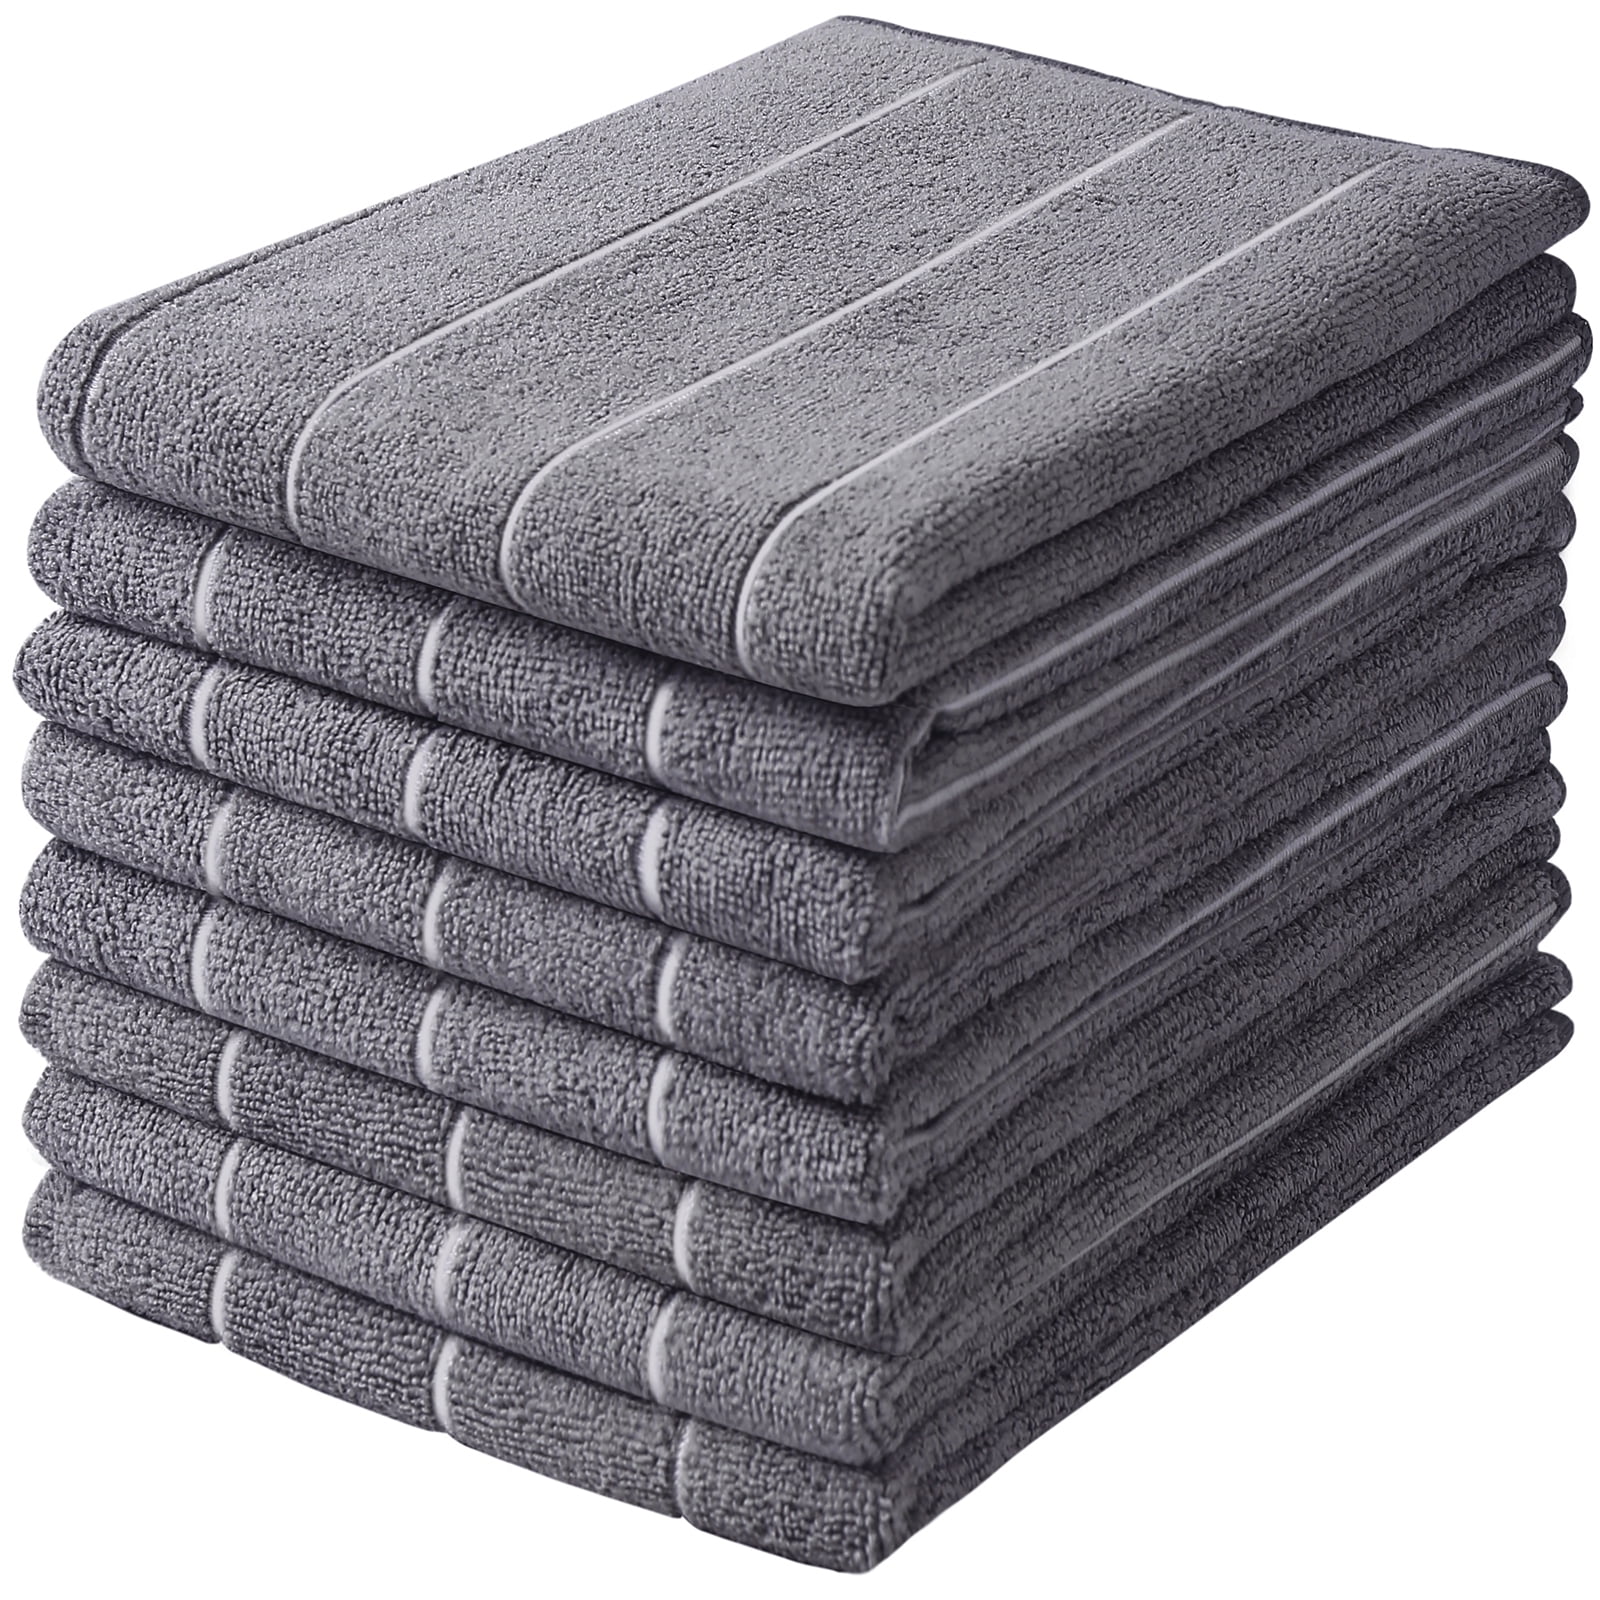 Pack of 8 Stripe Designed Grey and White Gryeer Microfibre Tea Towels 